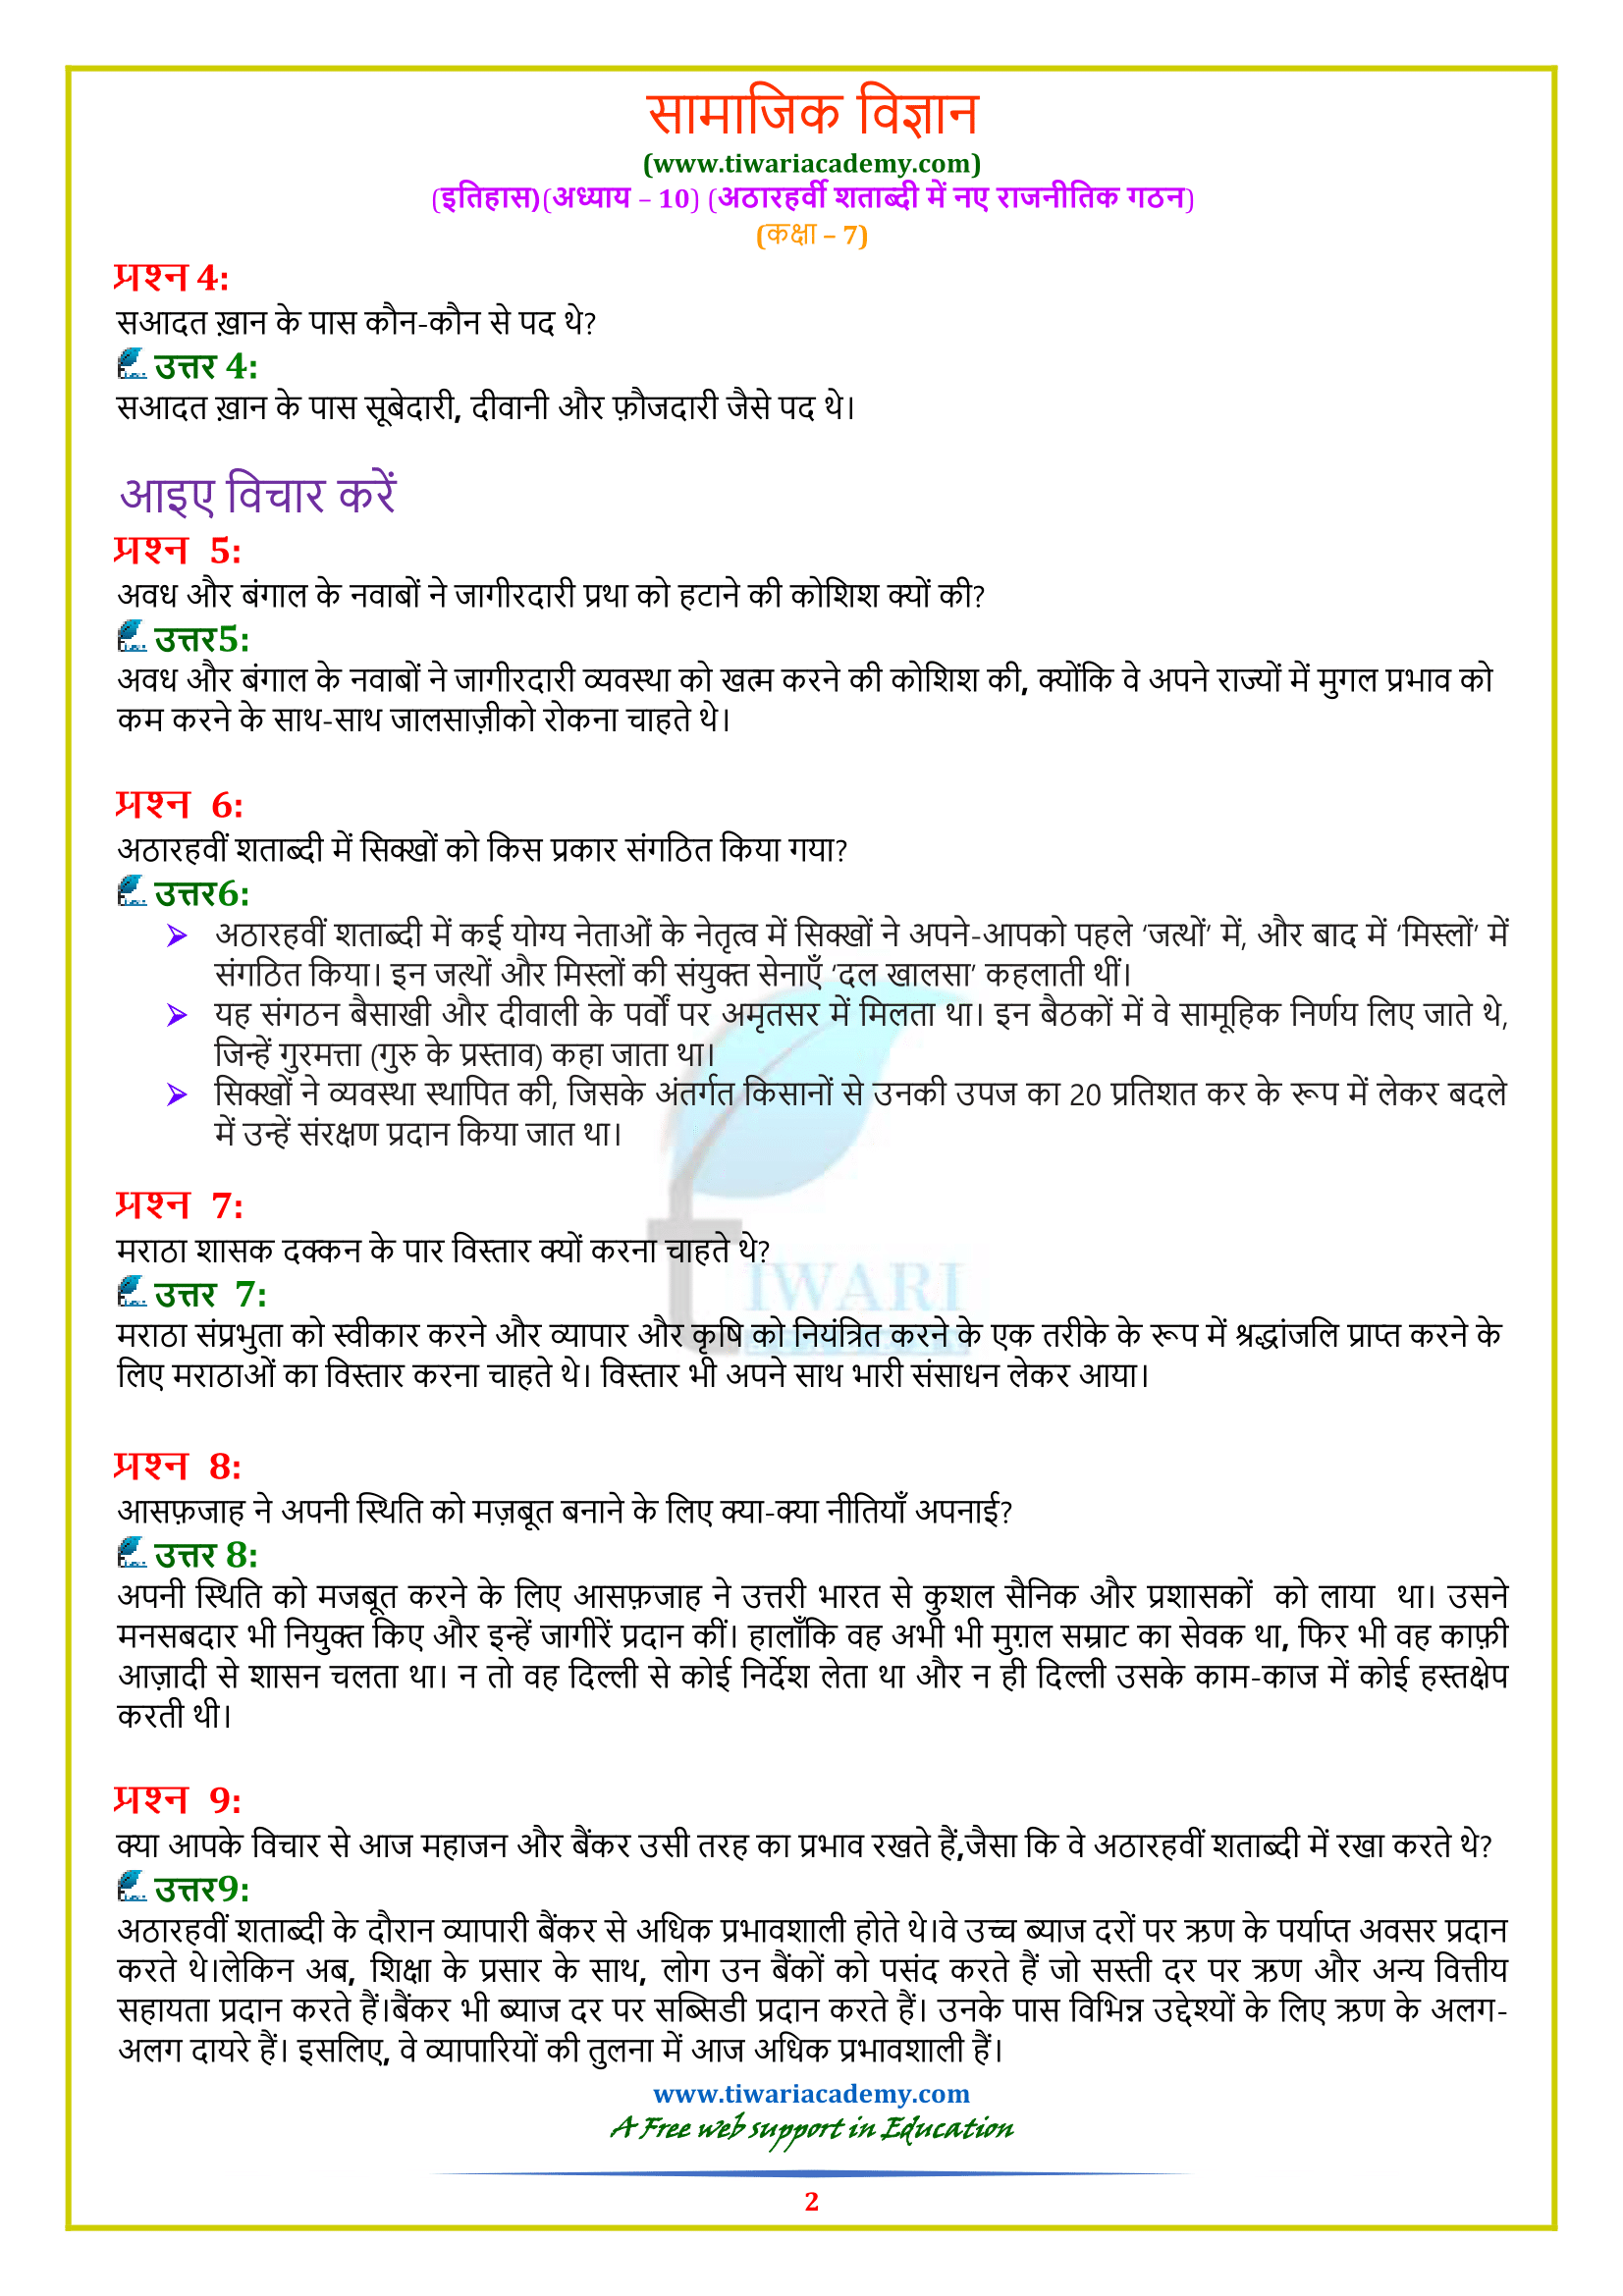 NCERT Solutions for Class 7 History chapter 10 in Hindi Medium